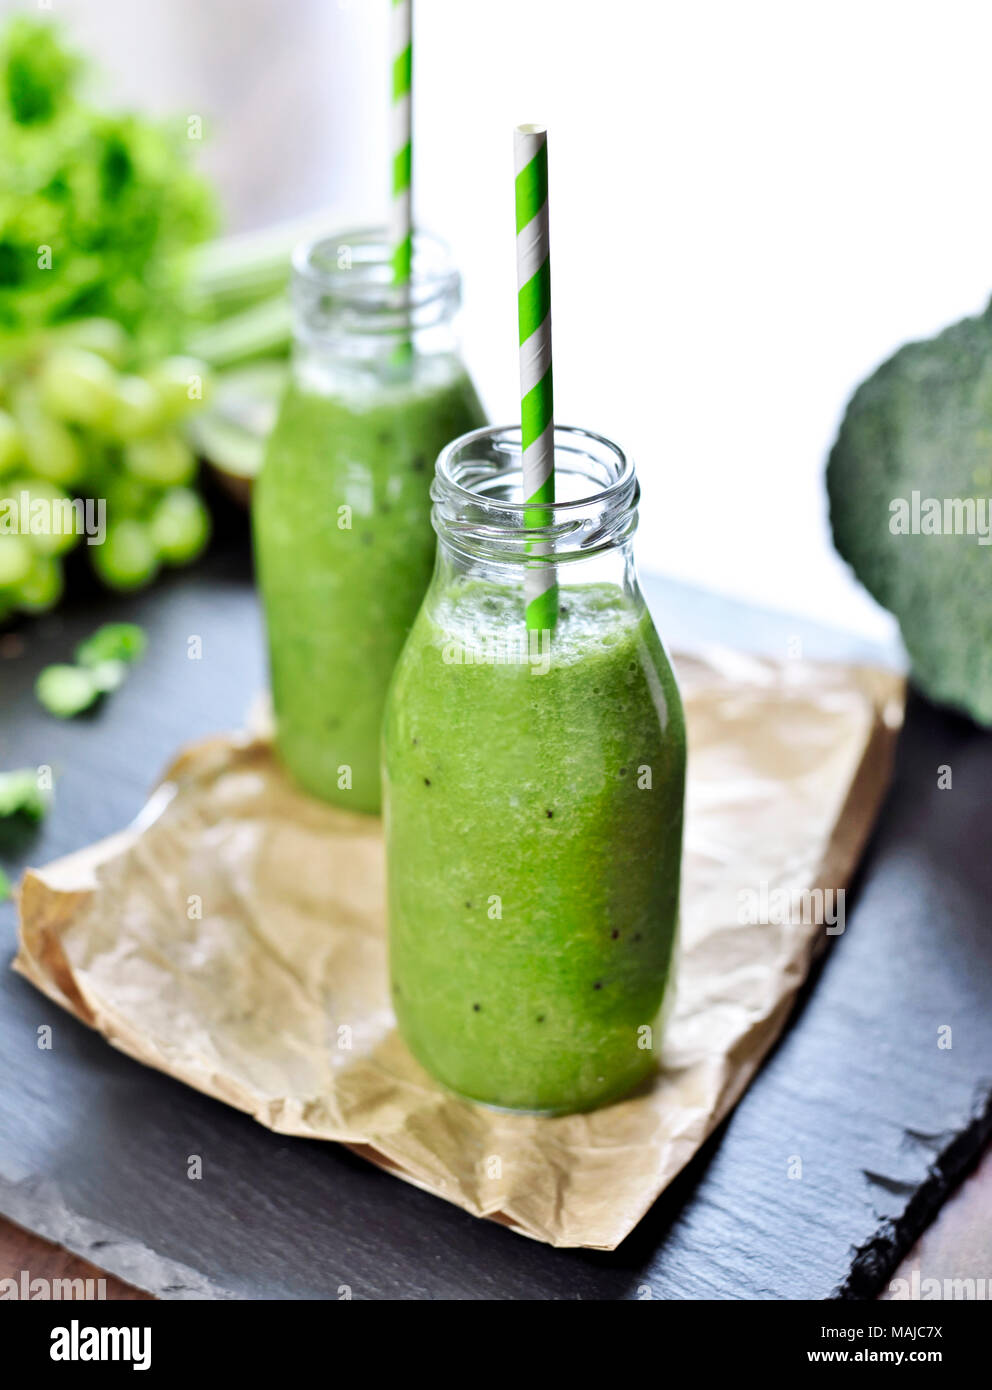 Green smoothie in drinking glasses. Fitness or dieting drink with kiwi, broccoli, lettuce and various ingredients. Healthy drink in a glass bottle. Stock Photo